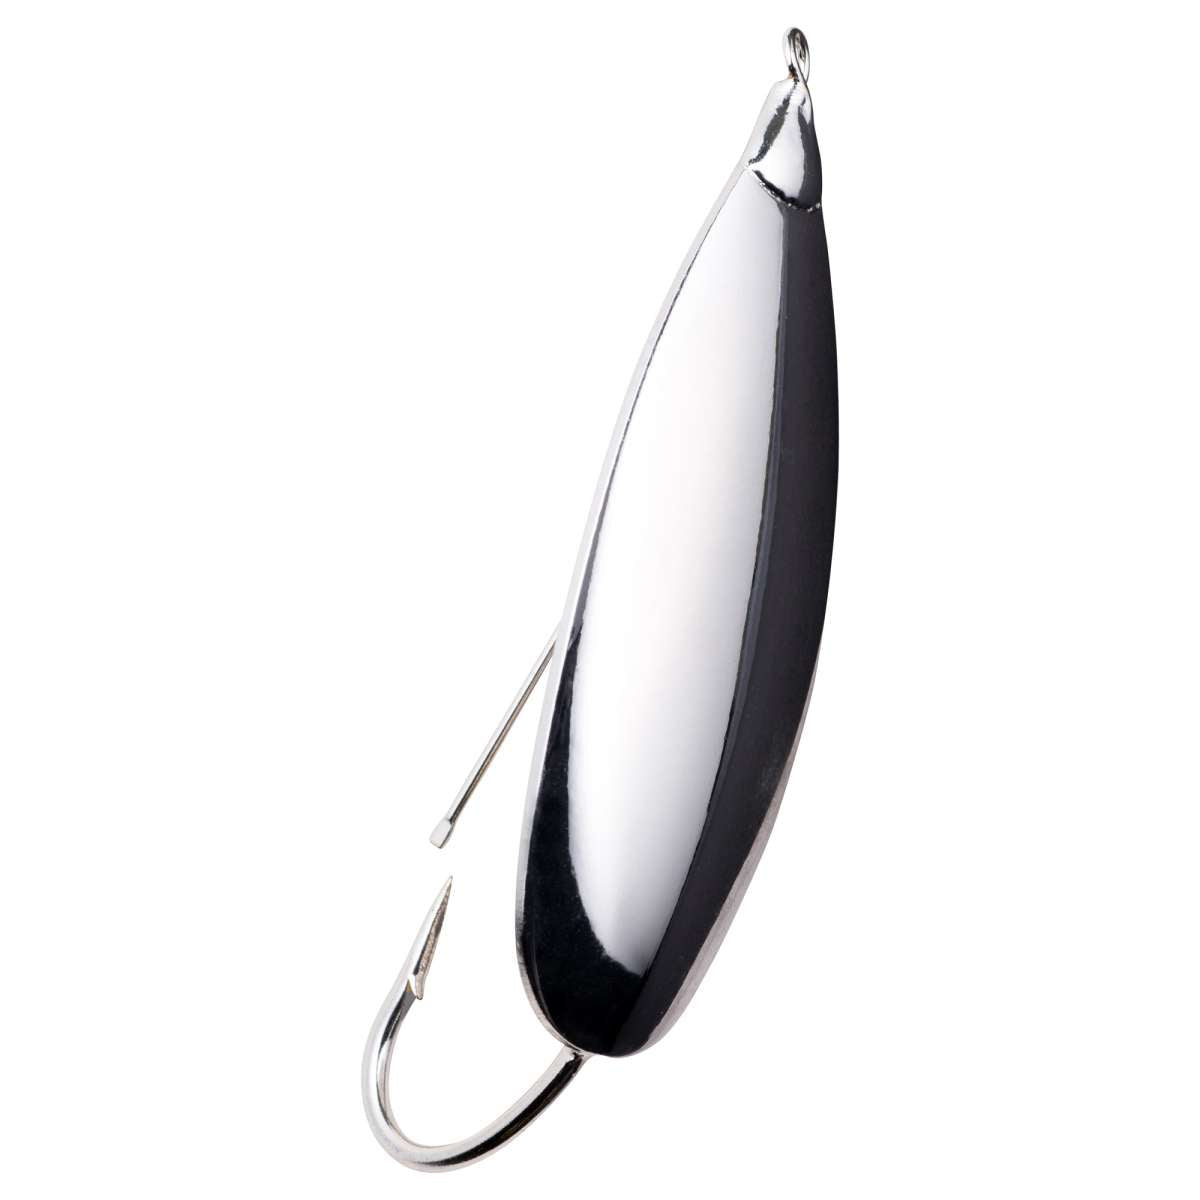 Johnson Silver Minnow Spoon – Lures and Lead